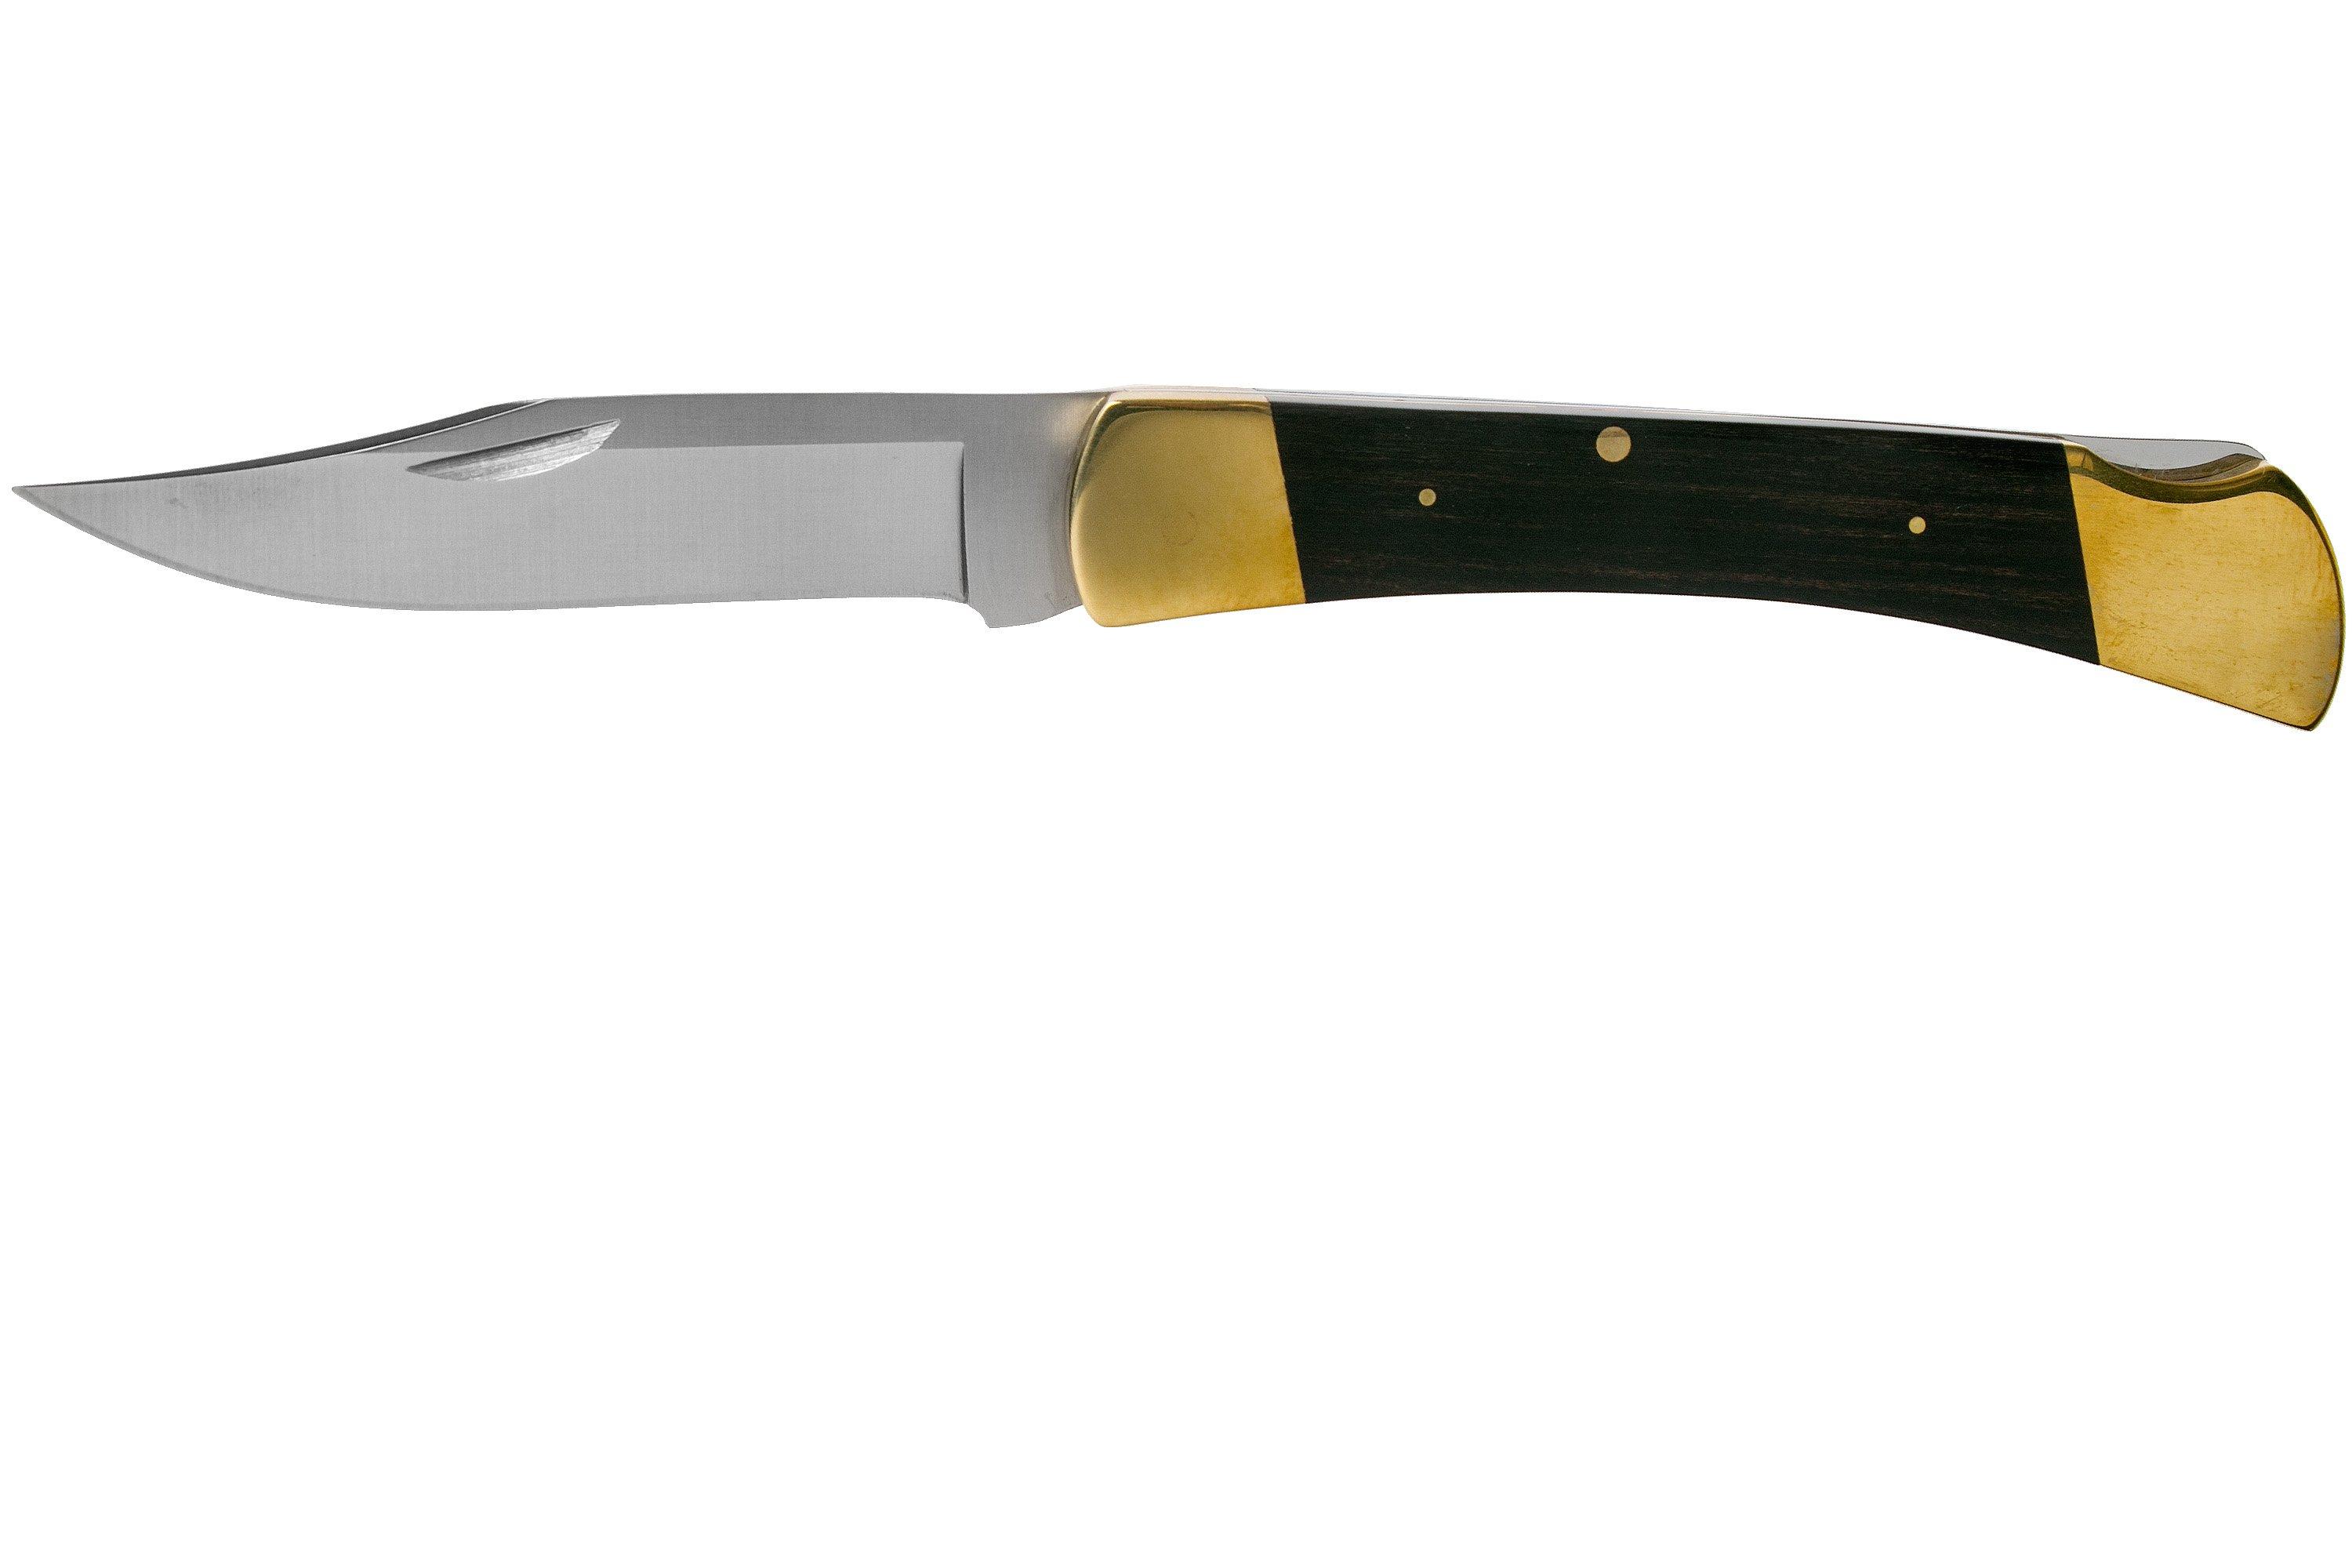 Buck 110 Folding Hunter, The Federal 50th Anniversary Limited Edition  0110EBS pocket knife